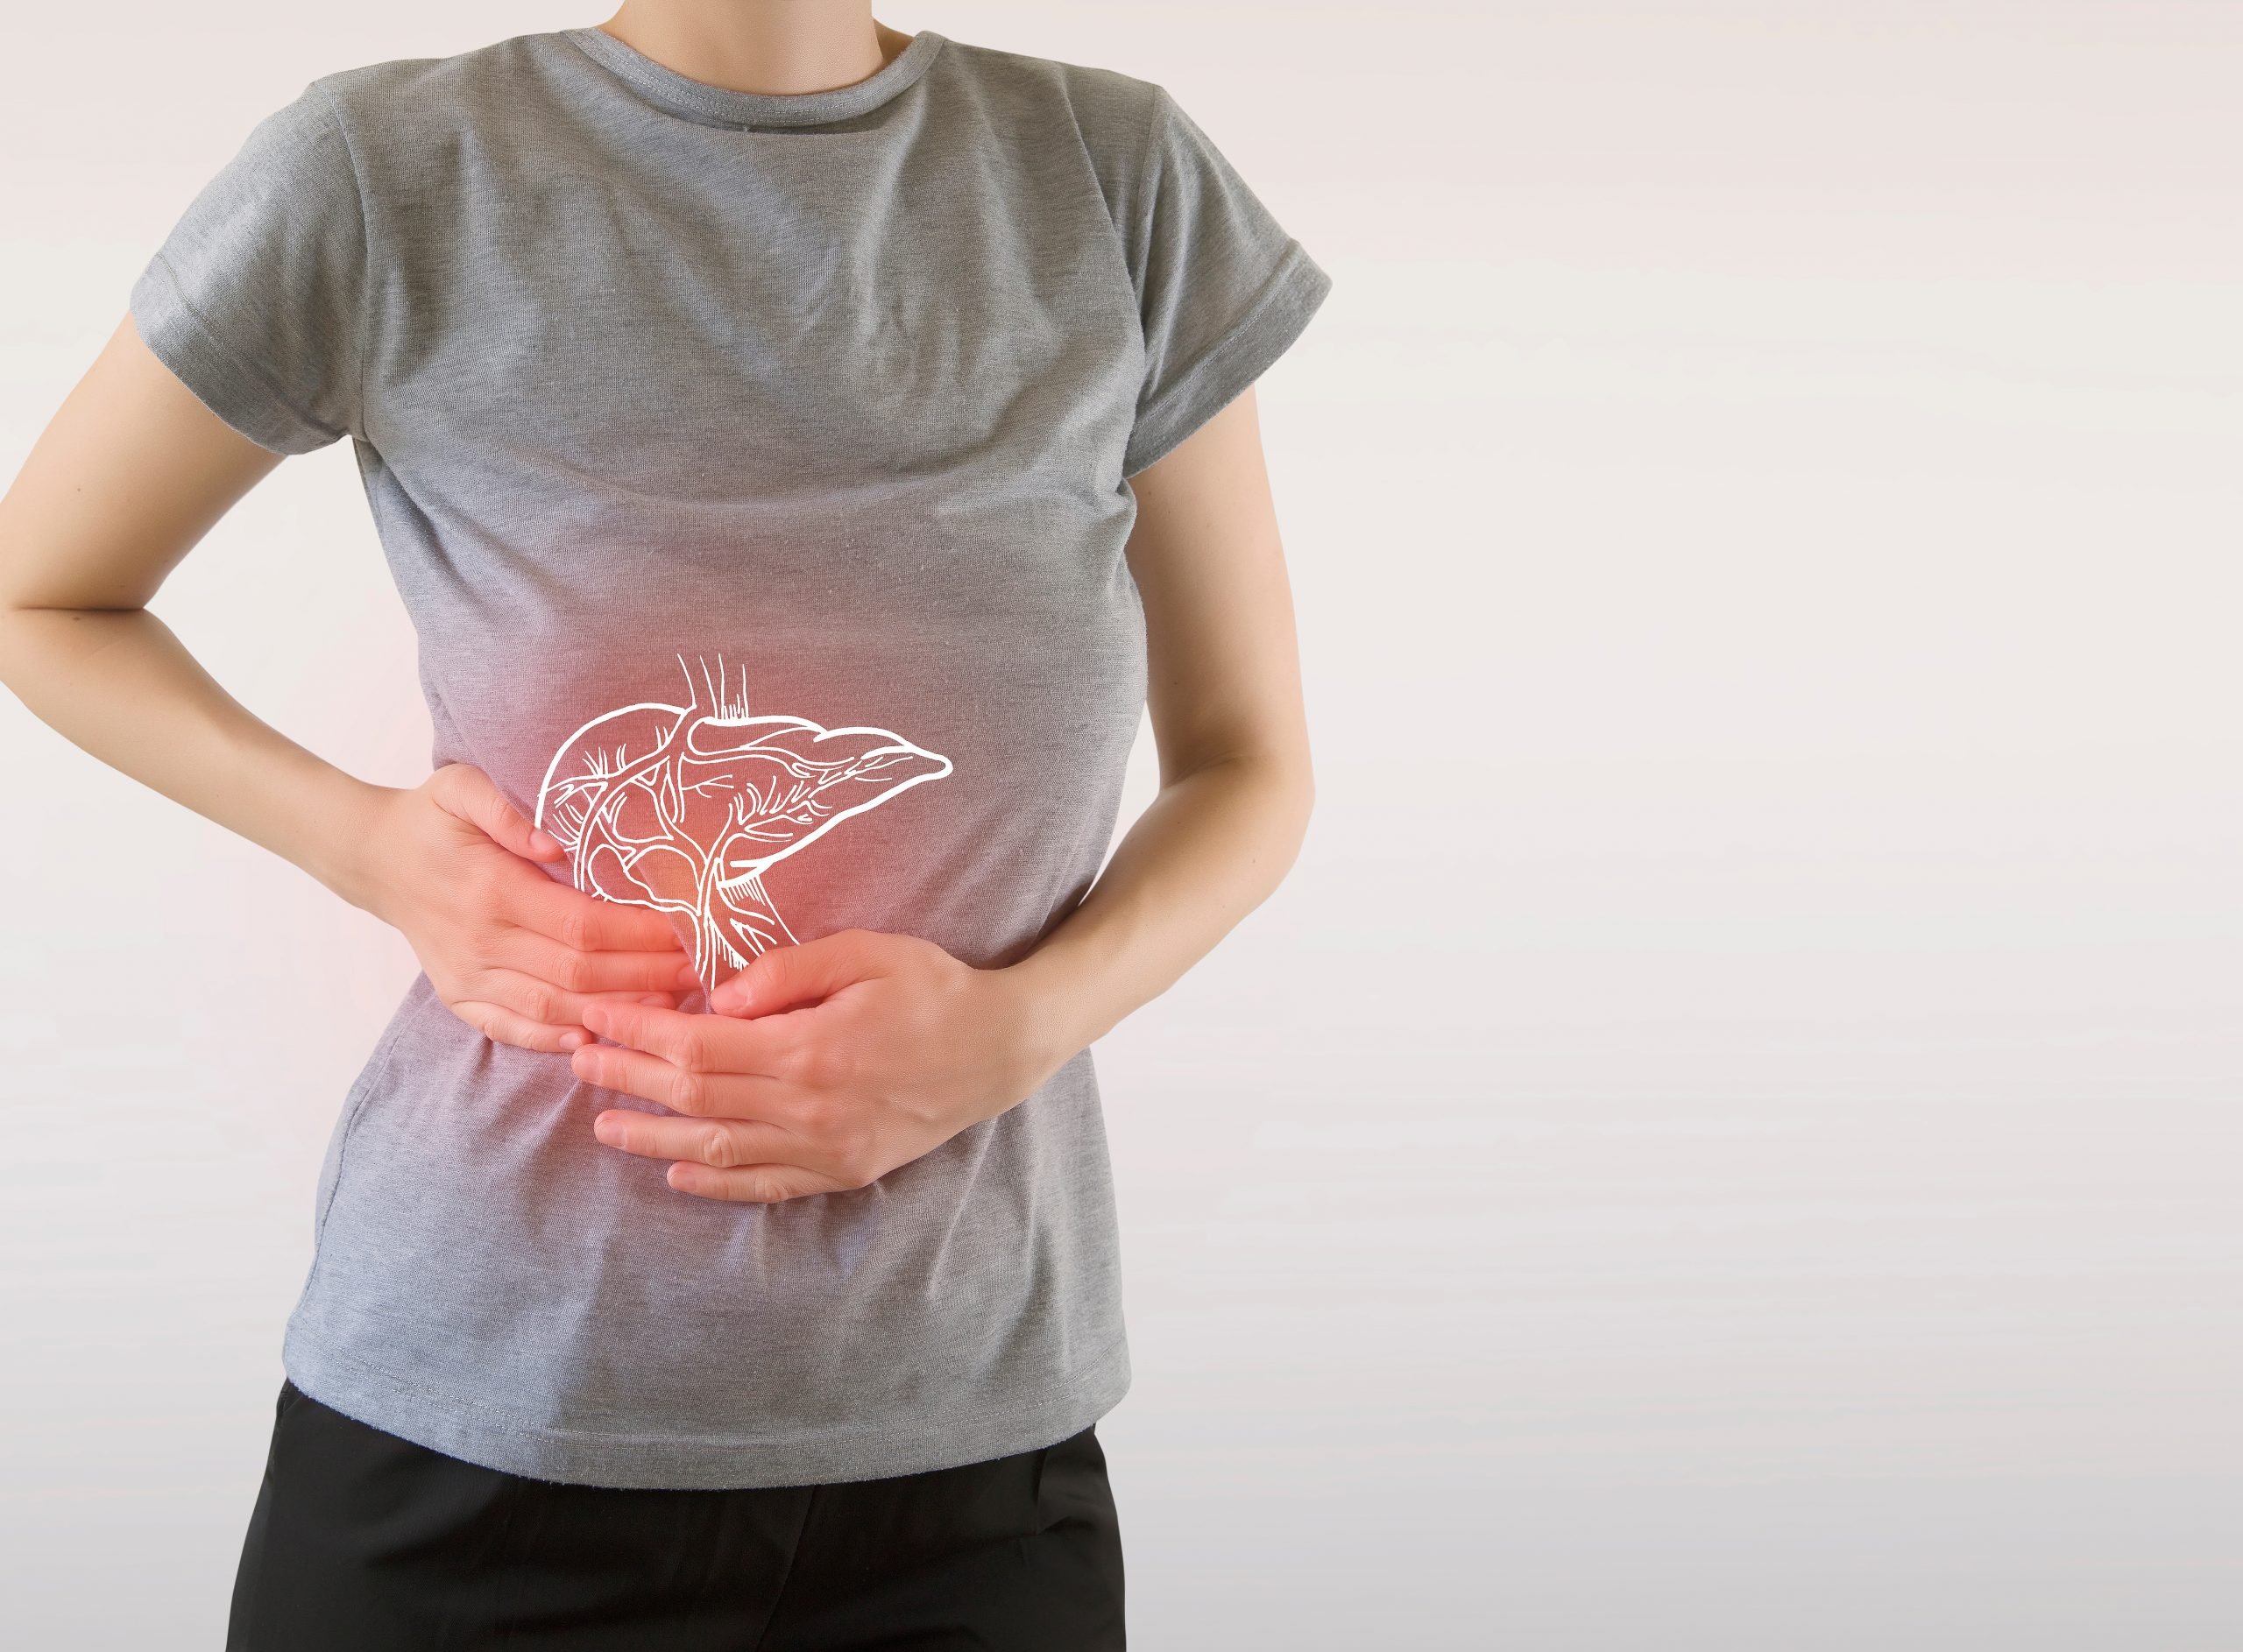 What You Should Know About COVID-19 and Liver Health